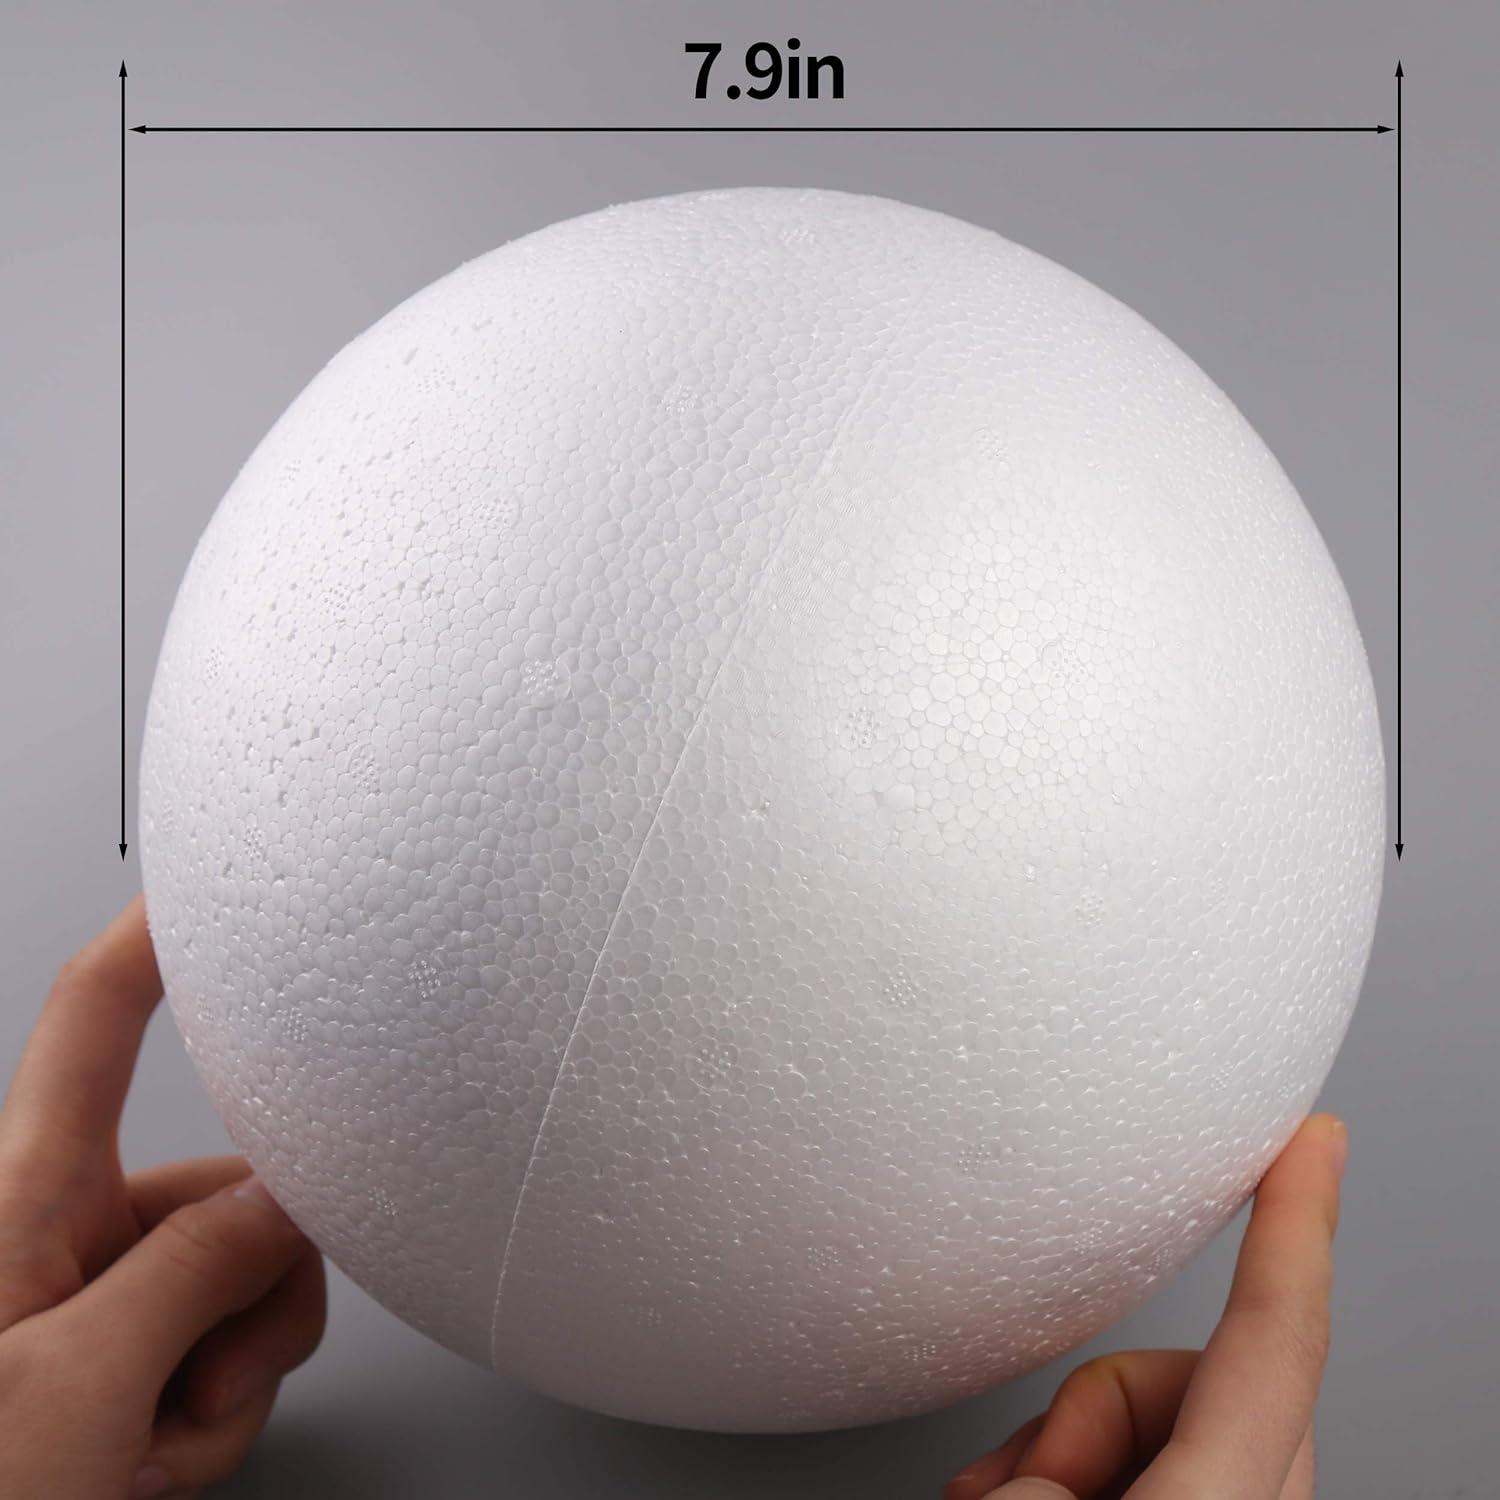 DIYASY 8' Large White Foam Balls,2 Pack Giant Foam Balls,Smooth Solid Craft  Balls for Christmas DIY Ornaments.